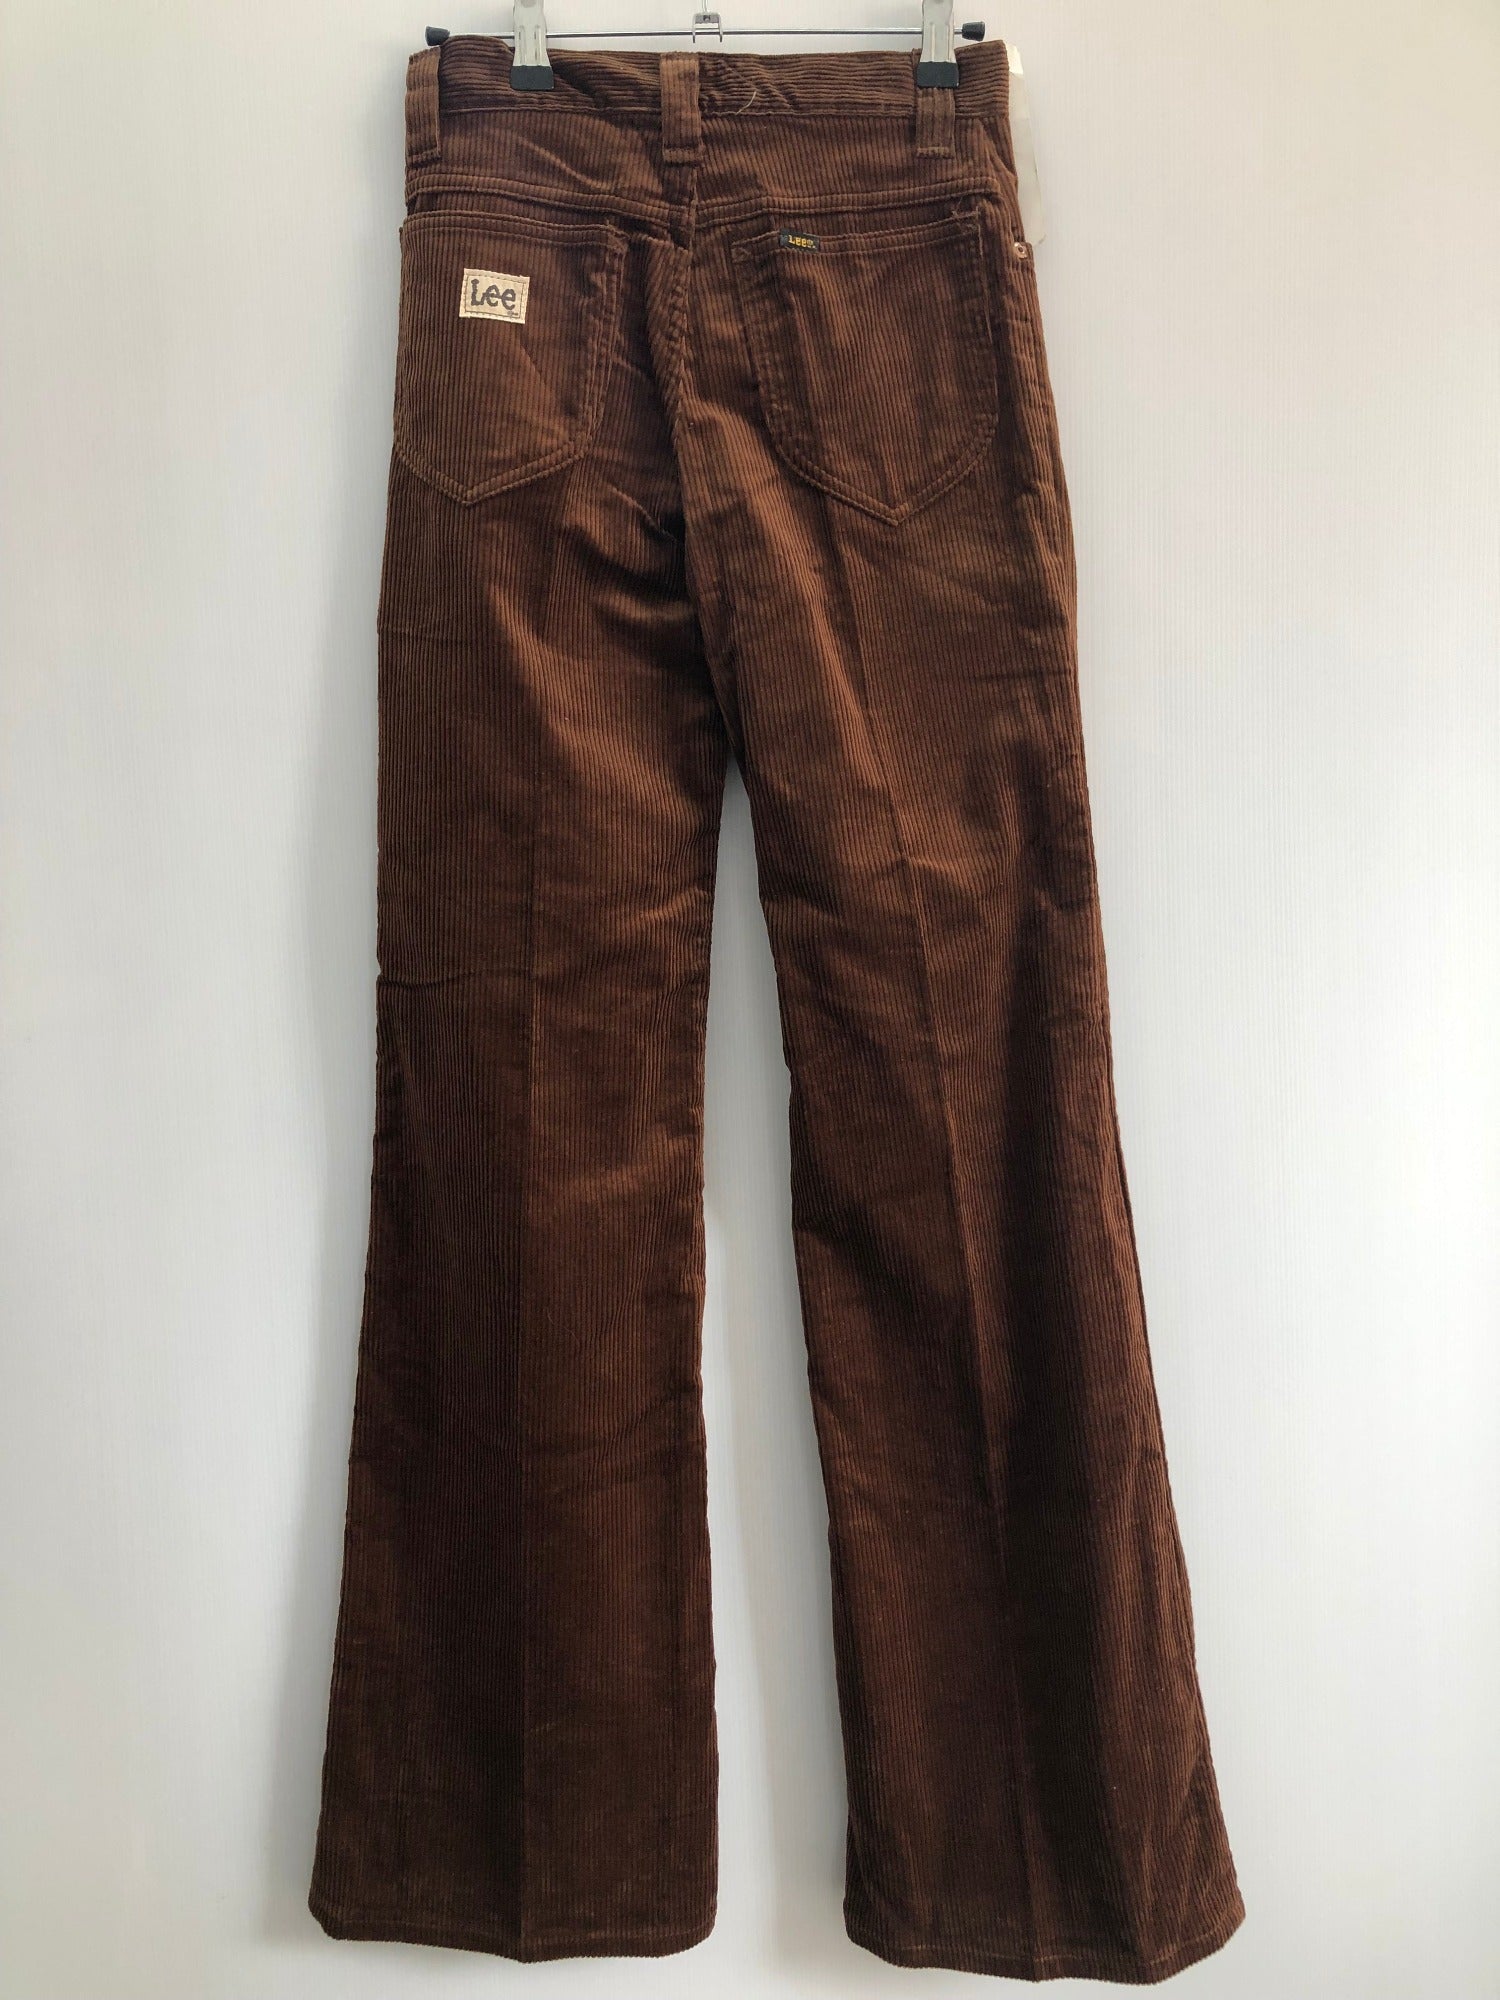 Vintage Deadstock 1970s Flared Bootcut Cords Corduroy Trousers in Brown by  Lee - Size UK 6 Petite - W24 L32 - Womens Vintage Clothing - Urban Village  – UrbanVillageVintage